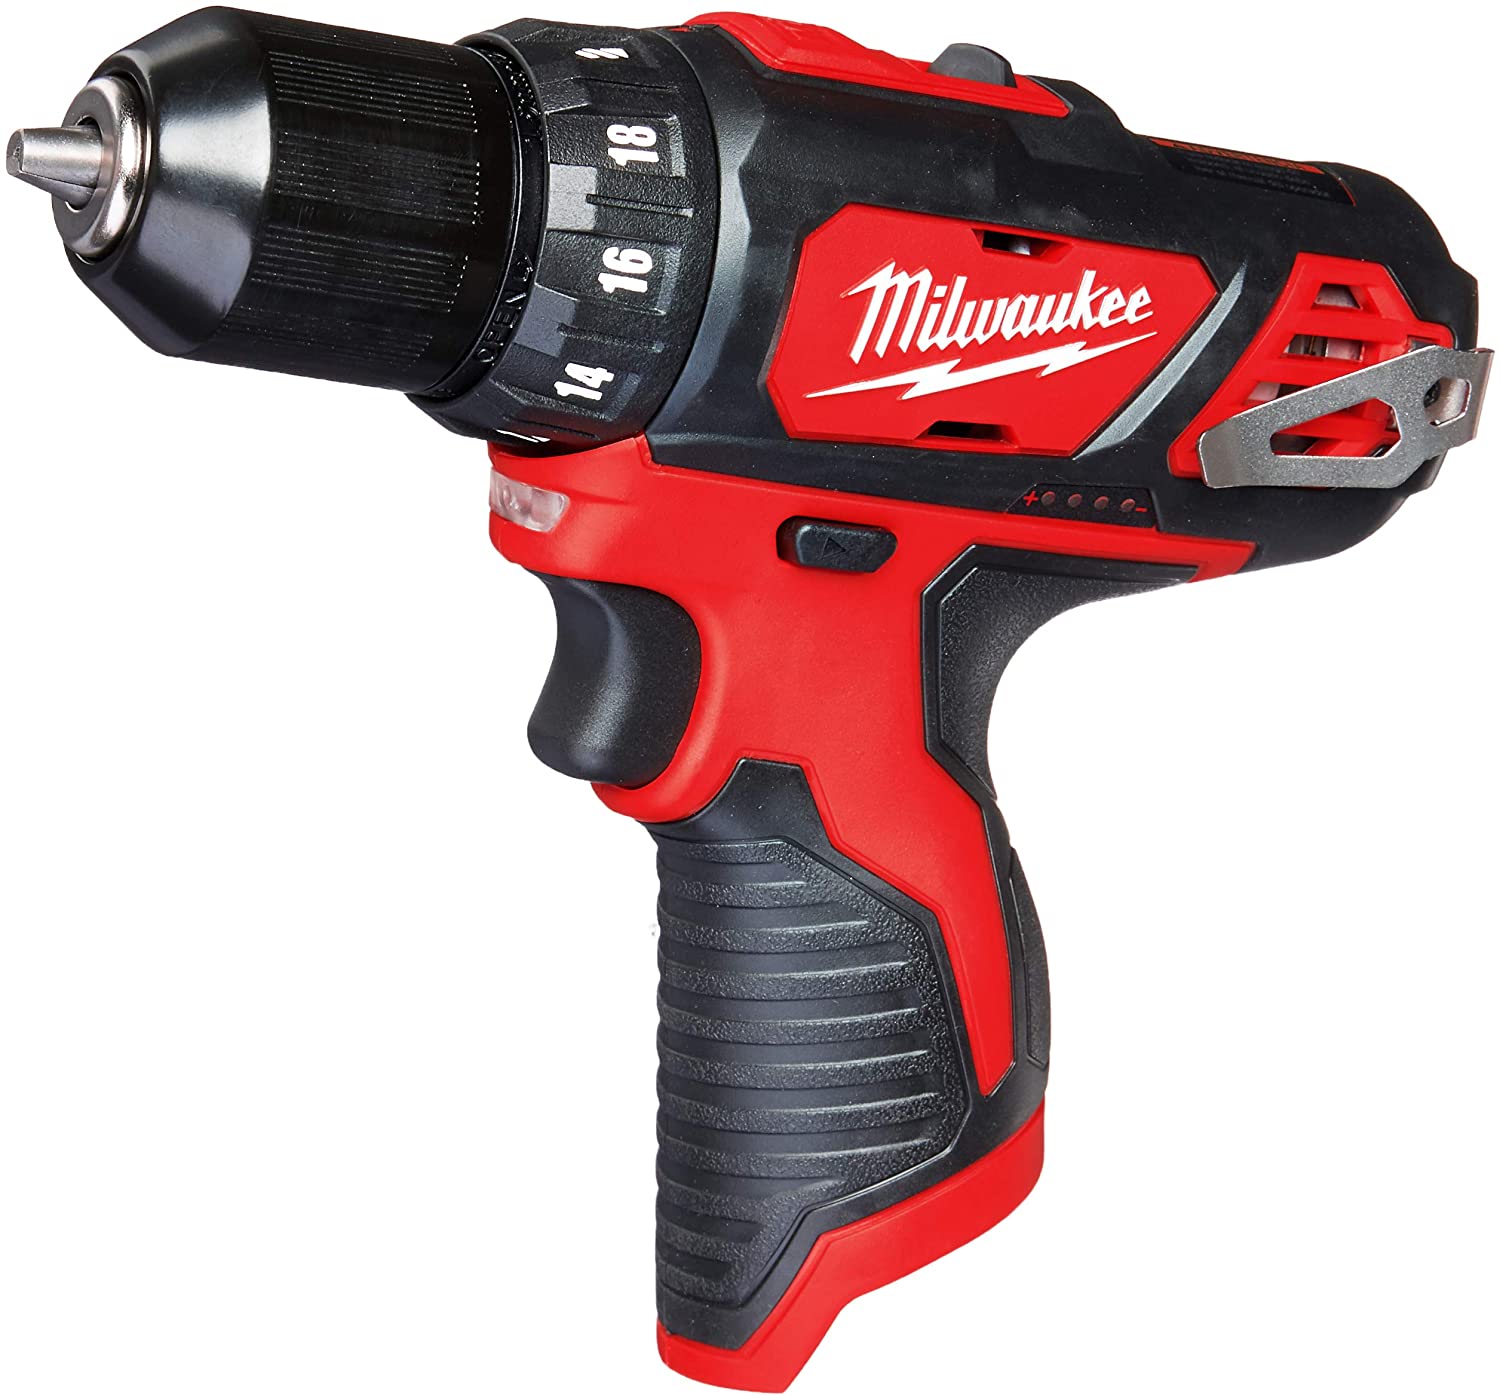 Milwaukee 2494-22 M12 Cordless Combination 3/8" Drill / Driver and 1/4" Hex Impact Driver Dual Power Tool Kit (2 Lithium Ion Batteries, Charger, and Bag Included) - image 3 of 7